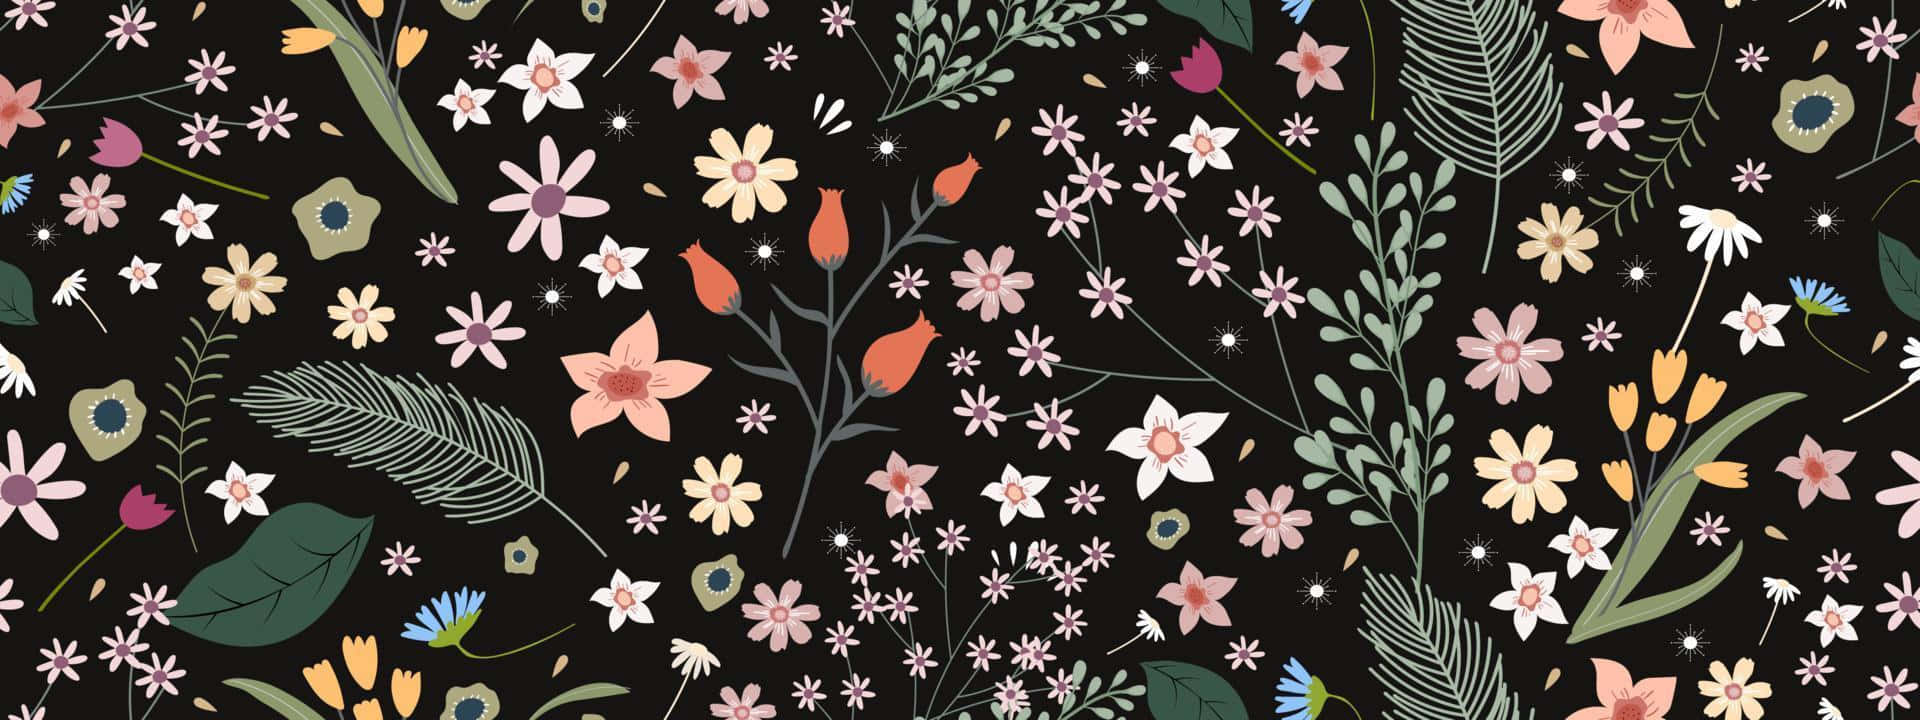 A Floral Pattern On A Black Background Wallpaper